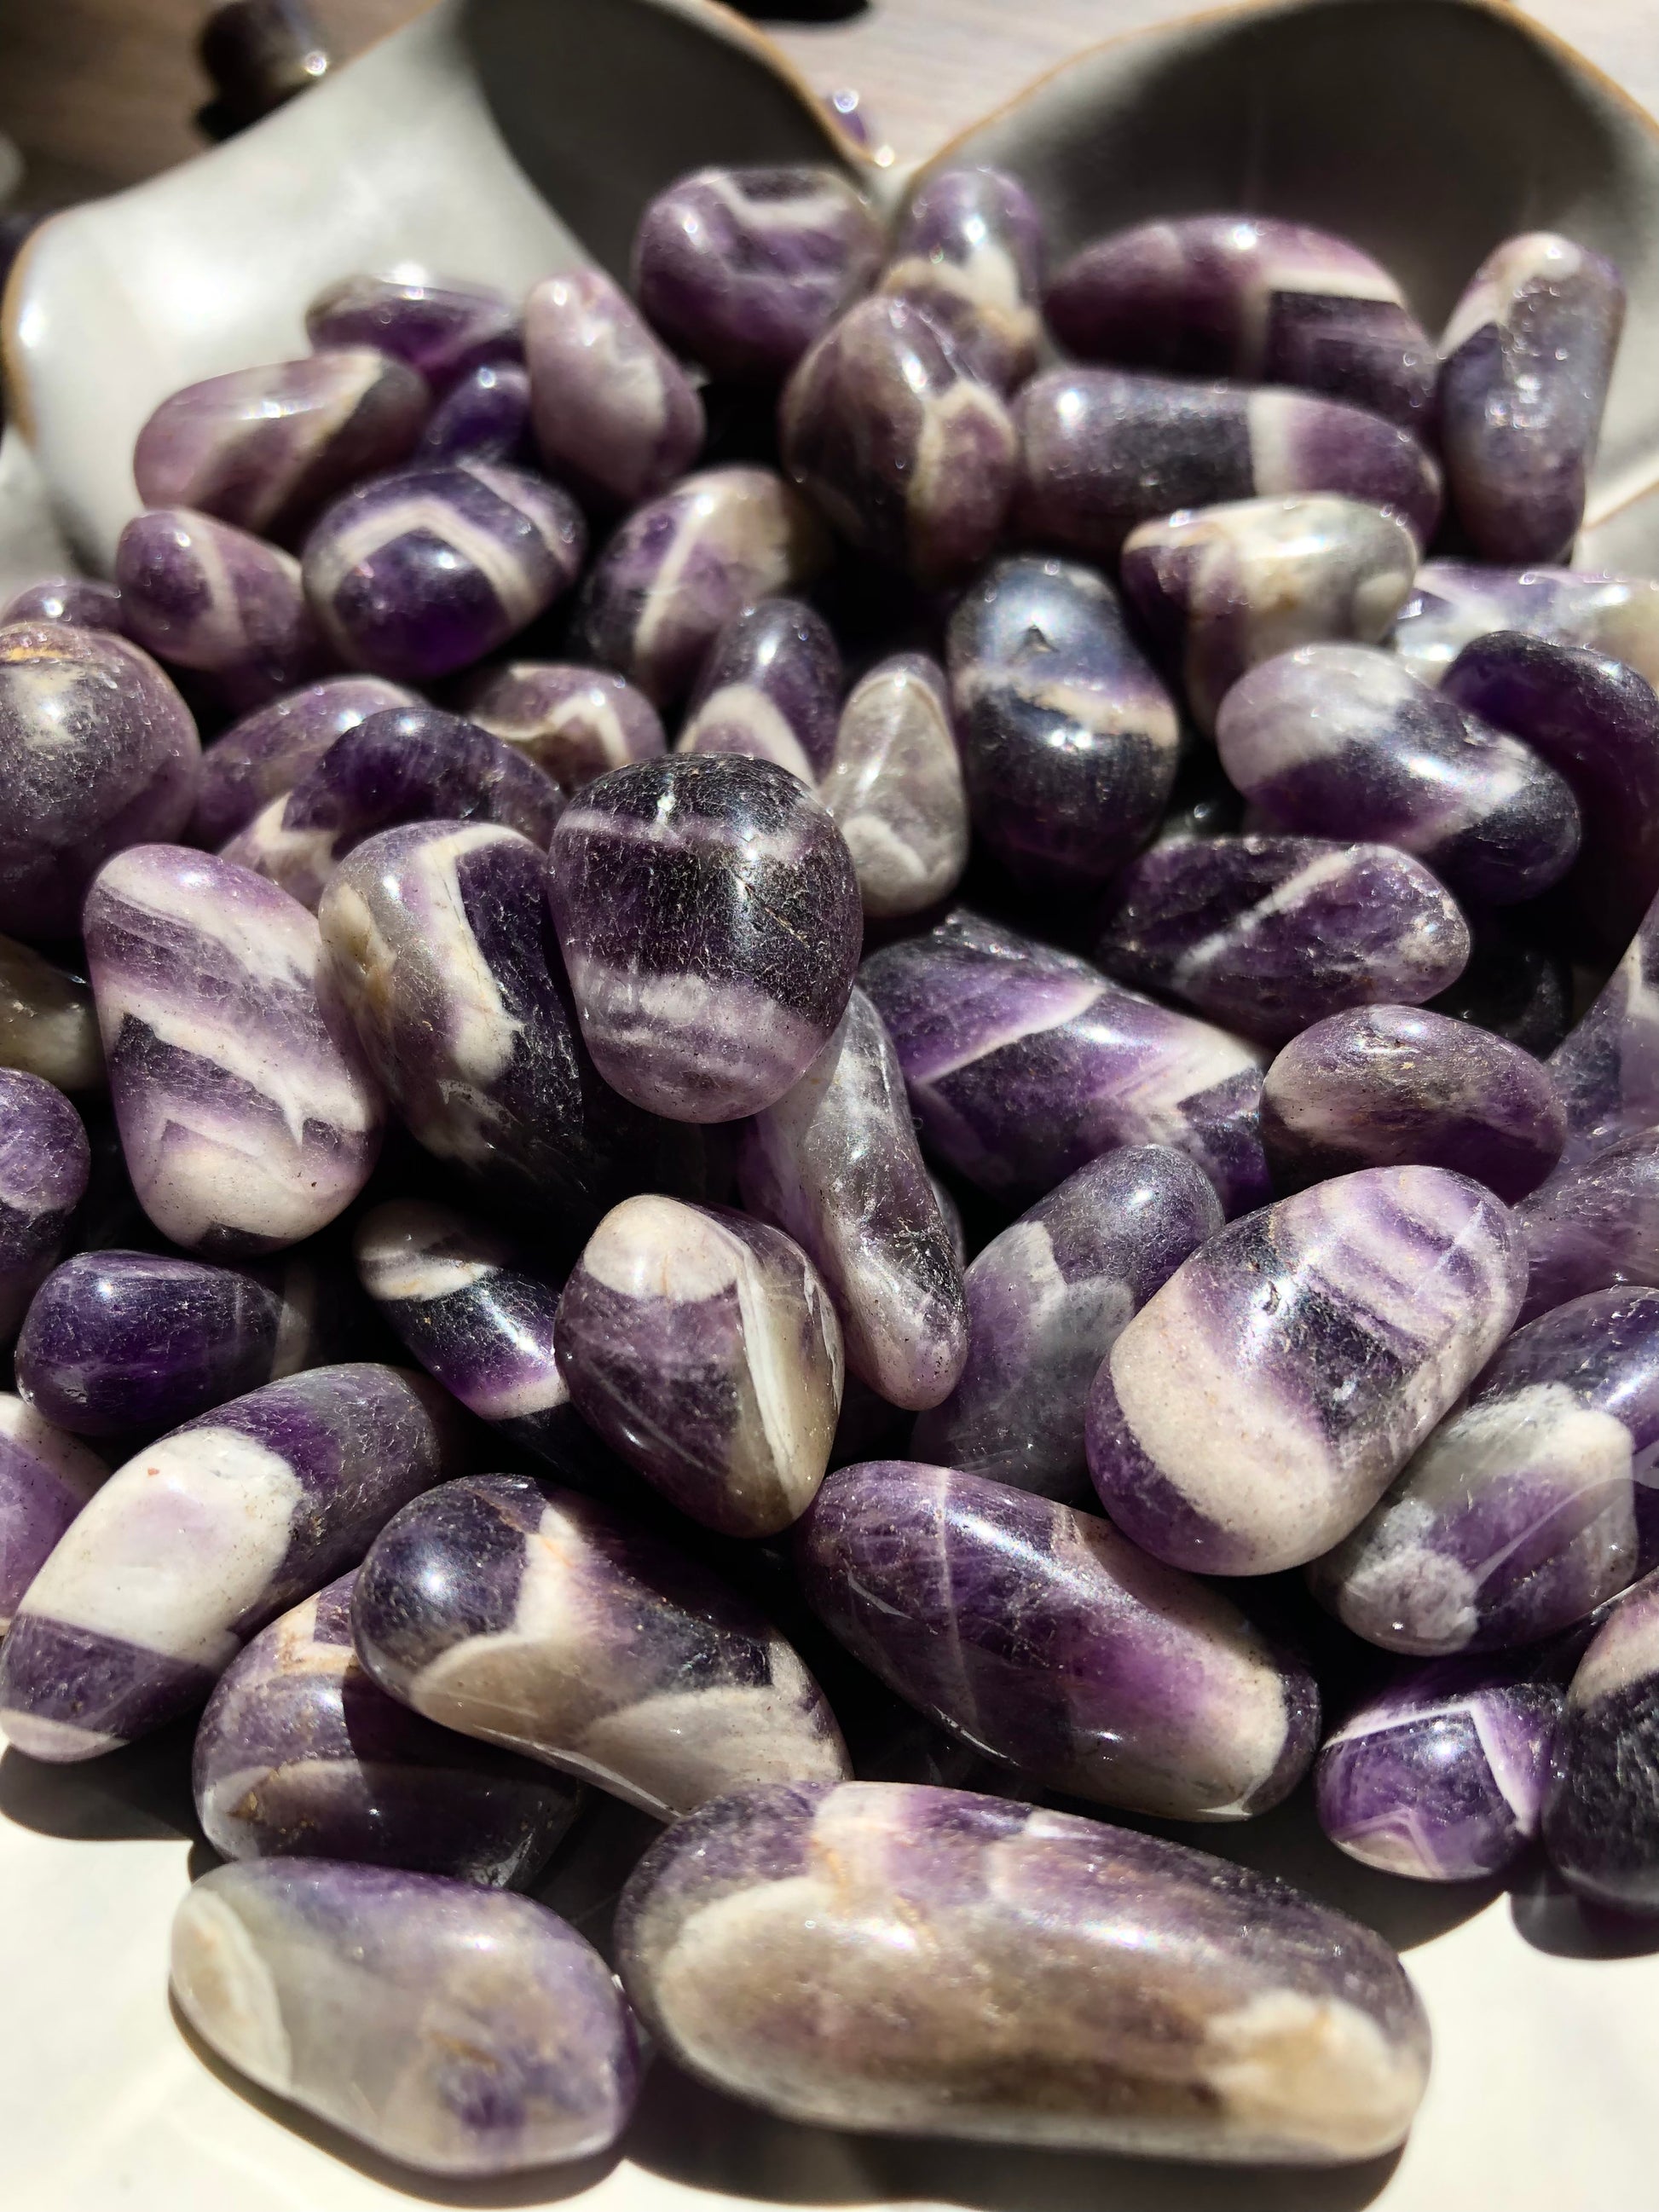 An up close picture of chevron banded amethyst stones. They are various hues of purple with swirls of white and cream colors.